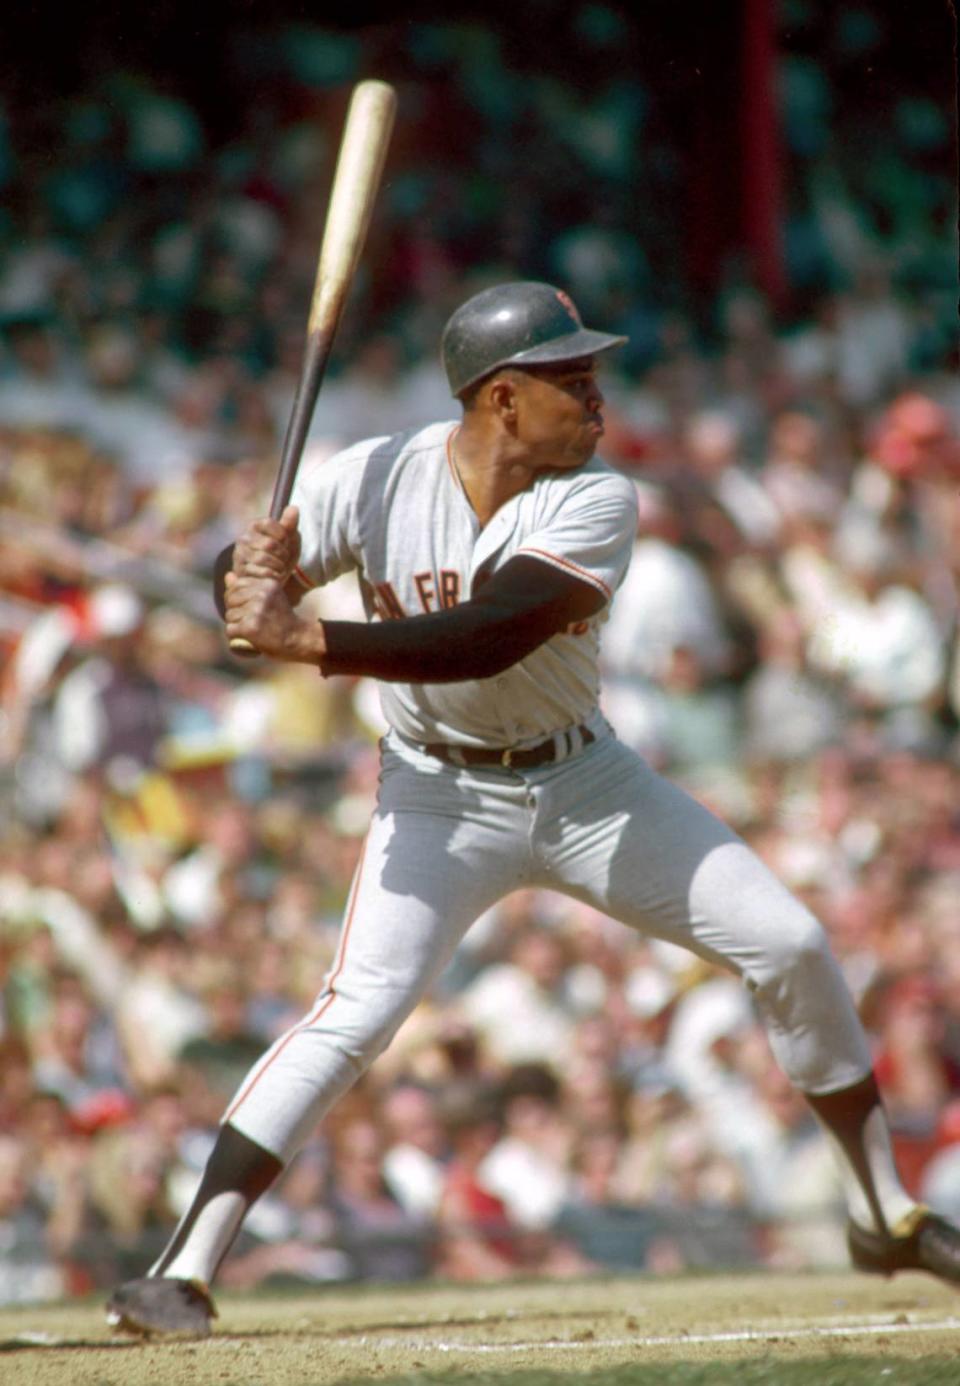 San Francisco Giants outfielder Willie Mays bats during the 1968 season.